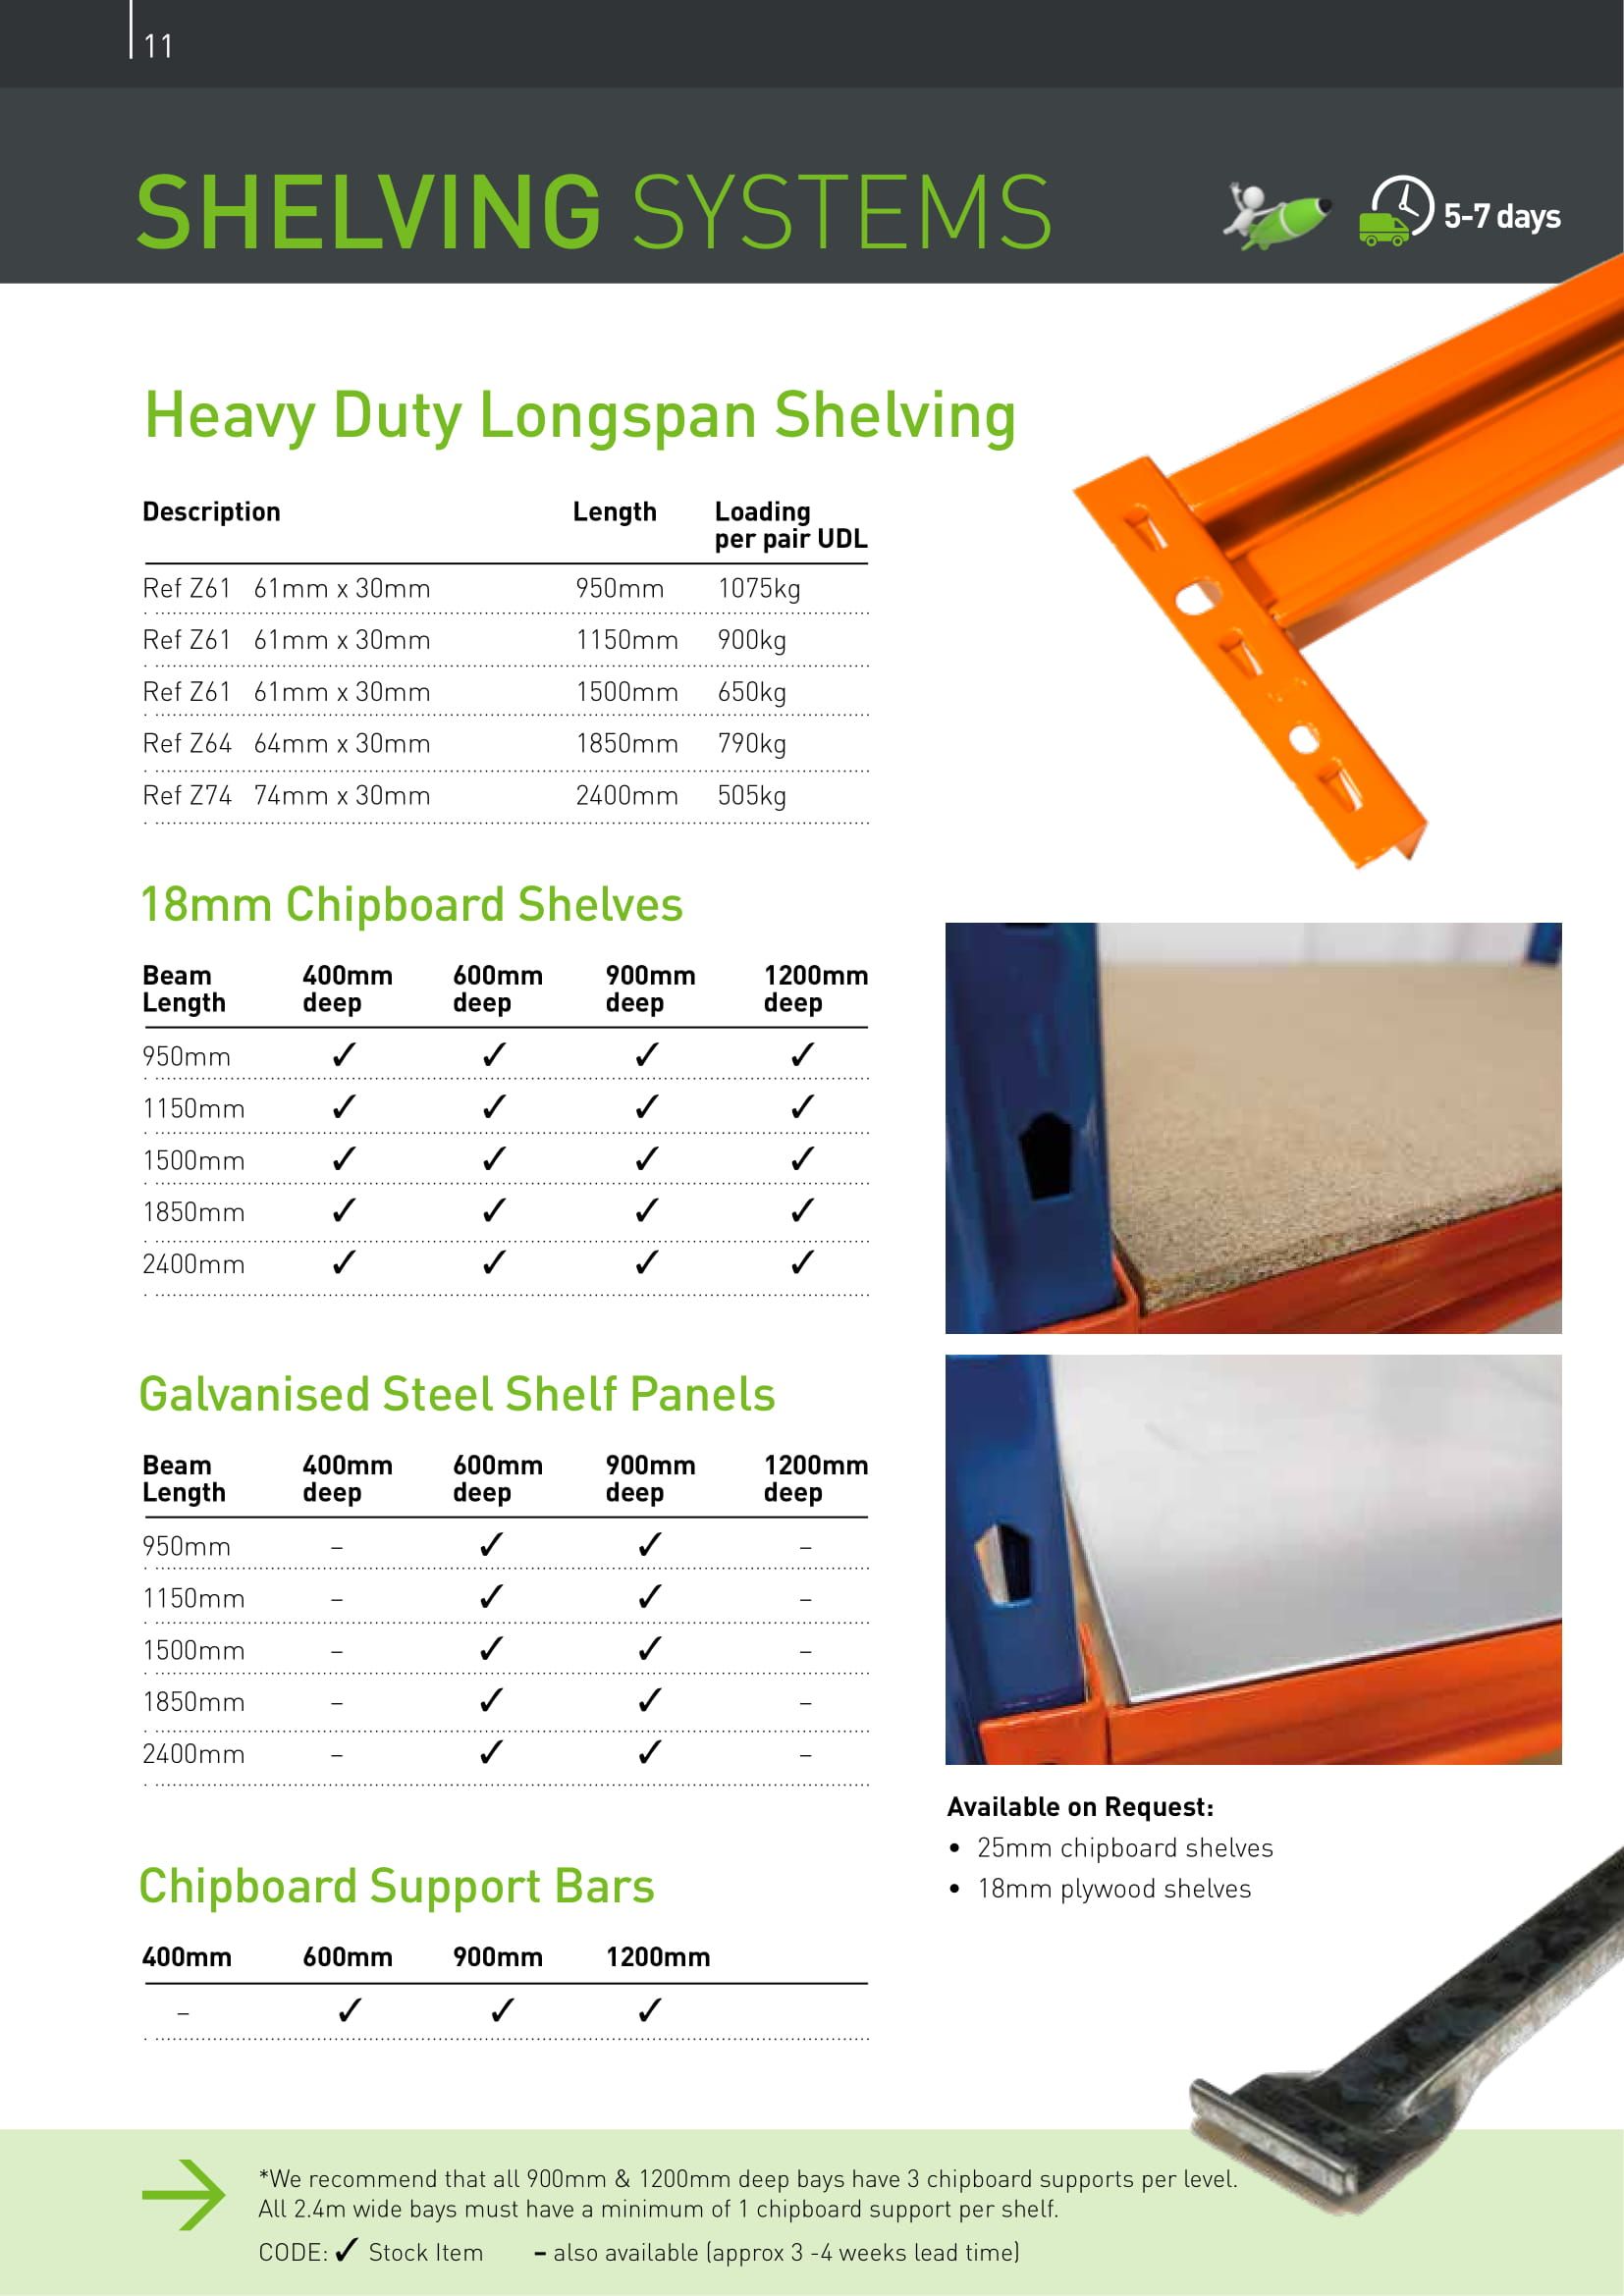 Shelving systems brochure page featuring different kinds of shelving